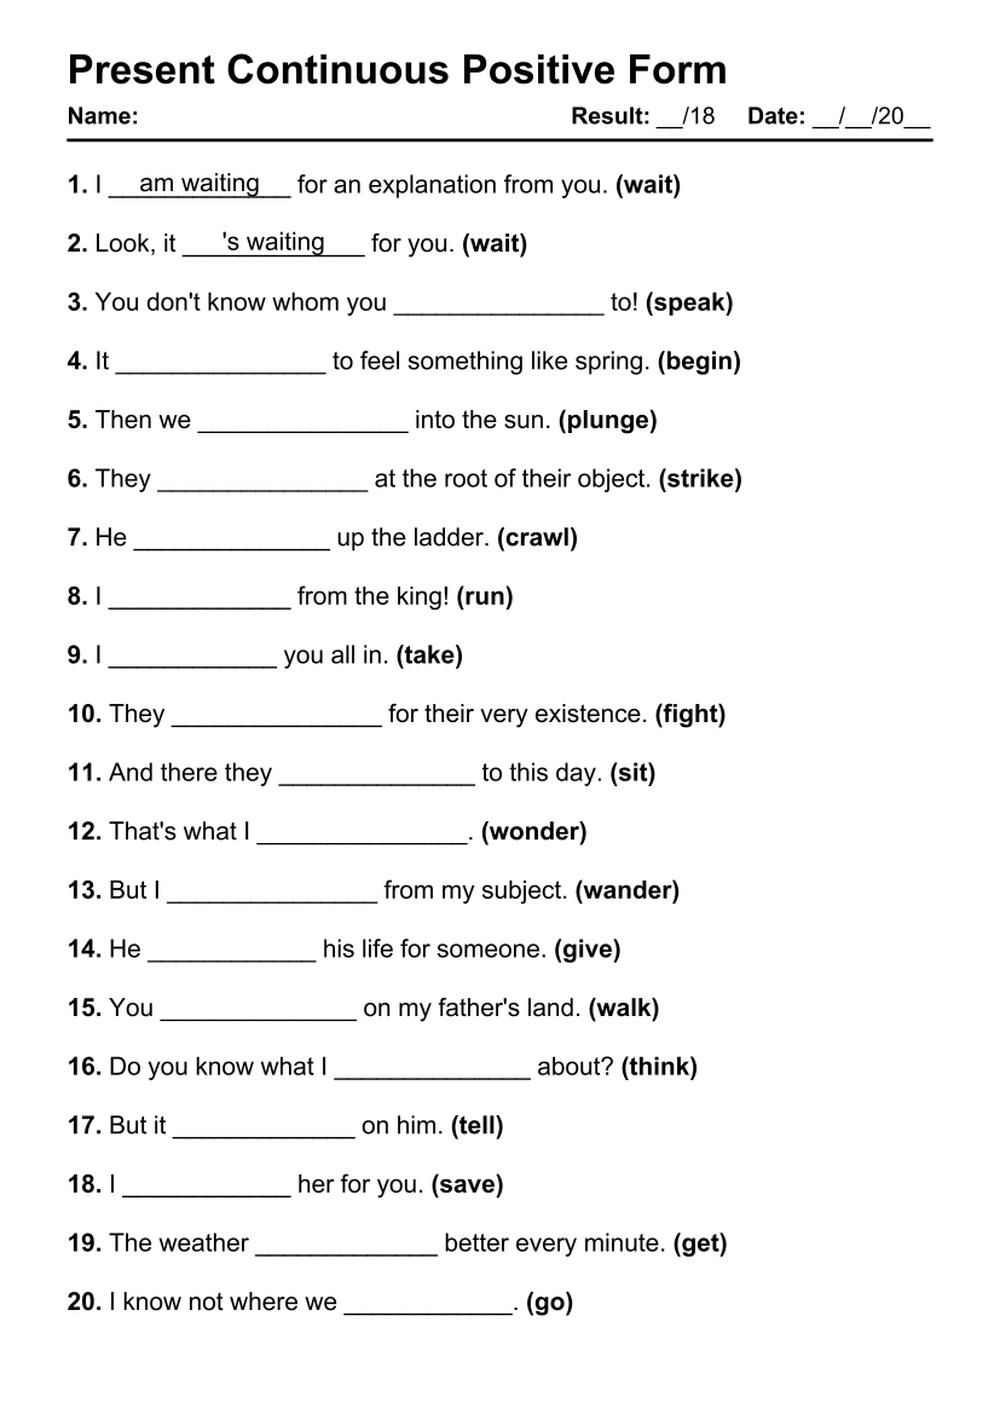 Present Continuous Positive Exercises PDF Worksheet with Answers - Test 2